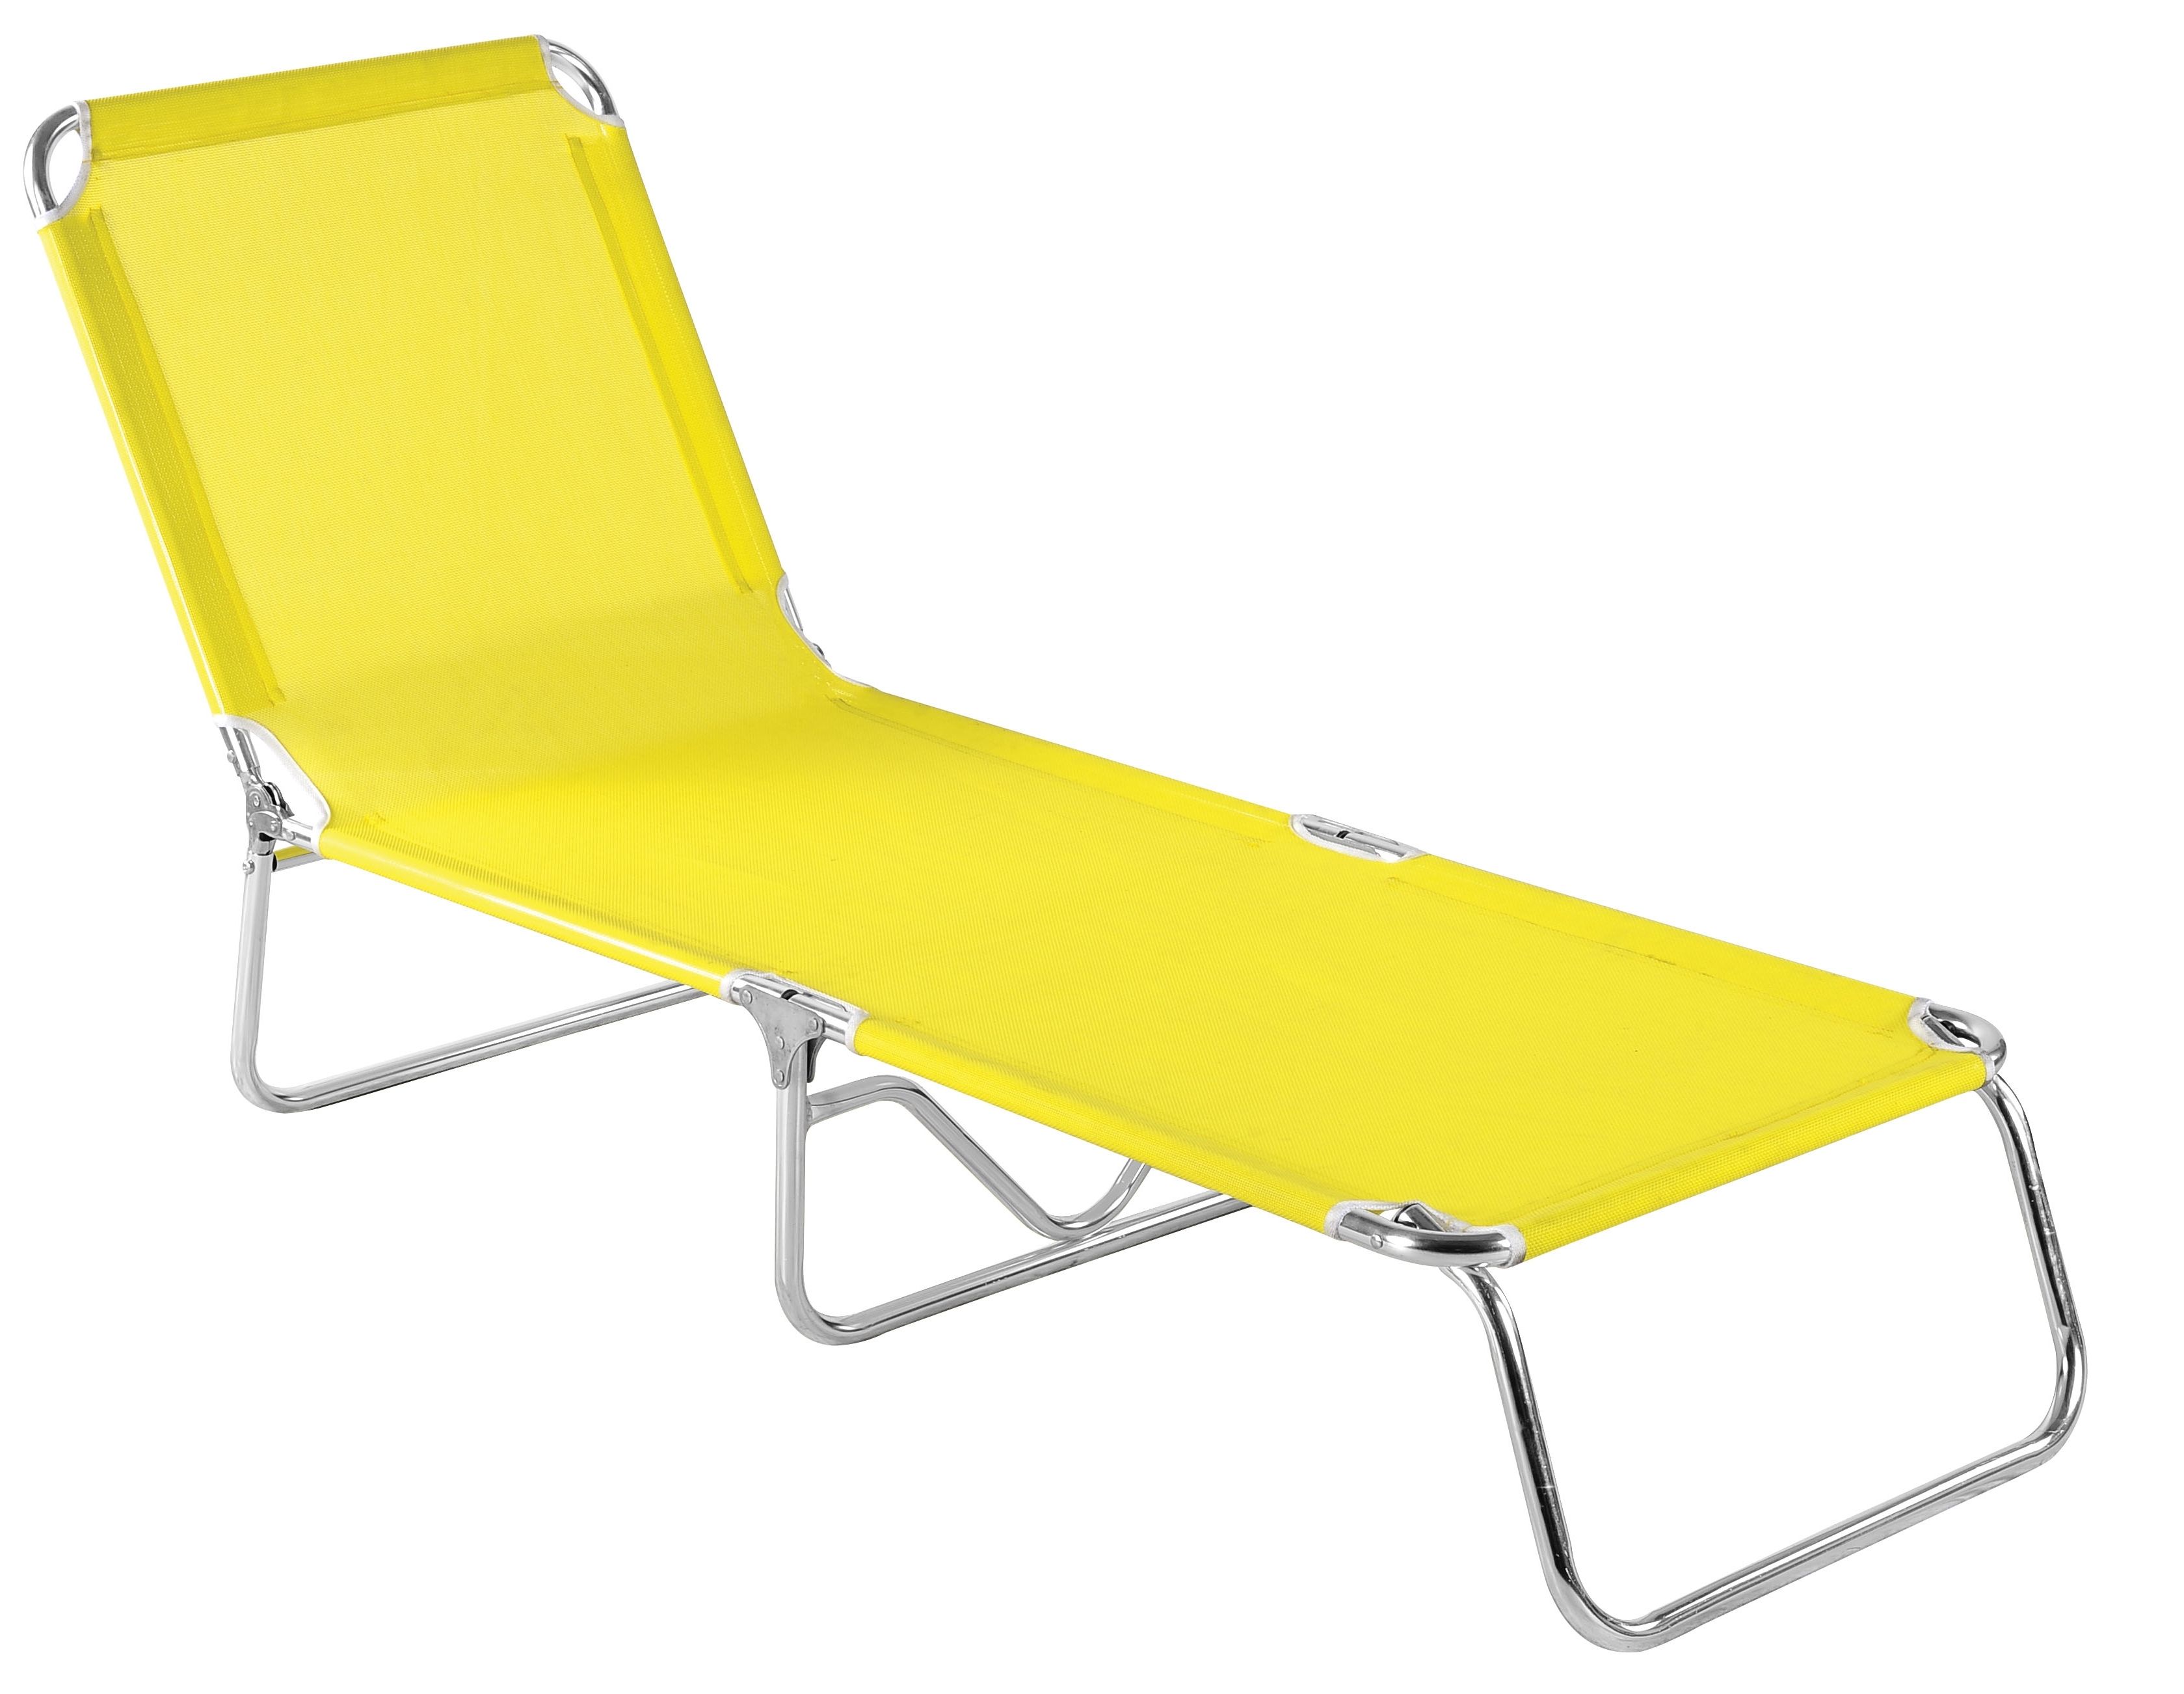 Widely Used Beach Chaise Lounge Chairs Inside Folding Beach Chaise Lounge Chairs • Lounge Chairs Ideas (View 5 of 15)